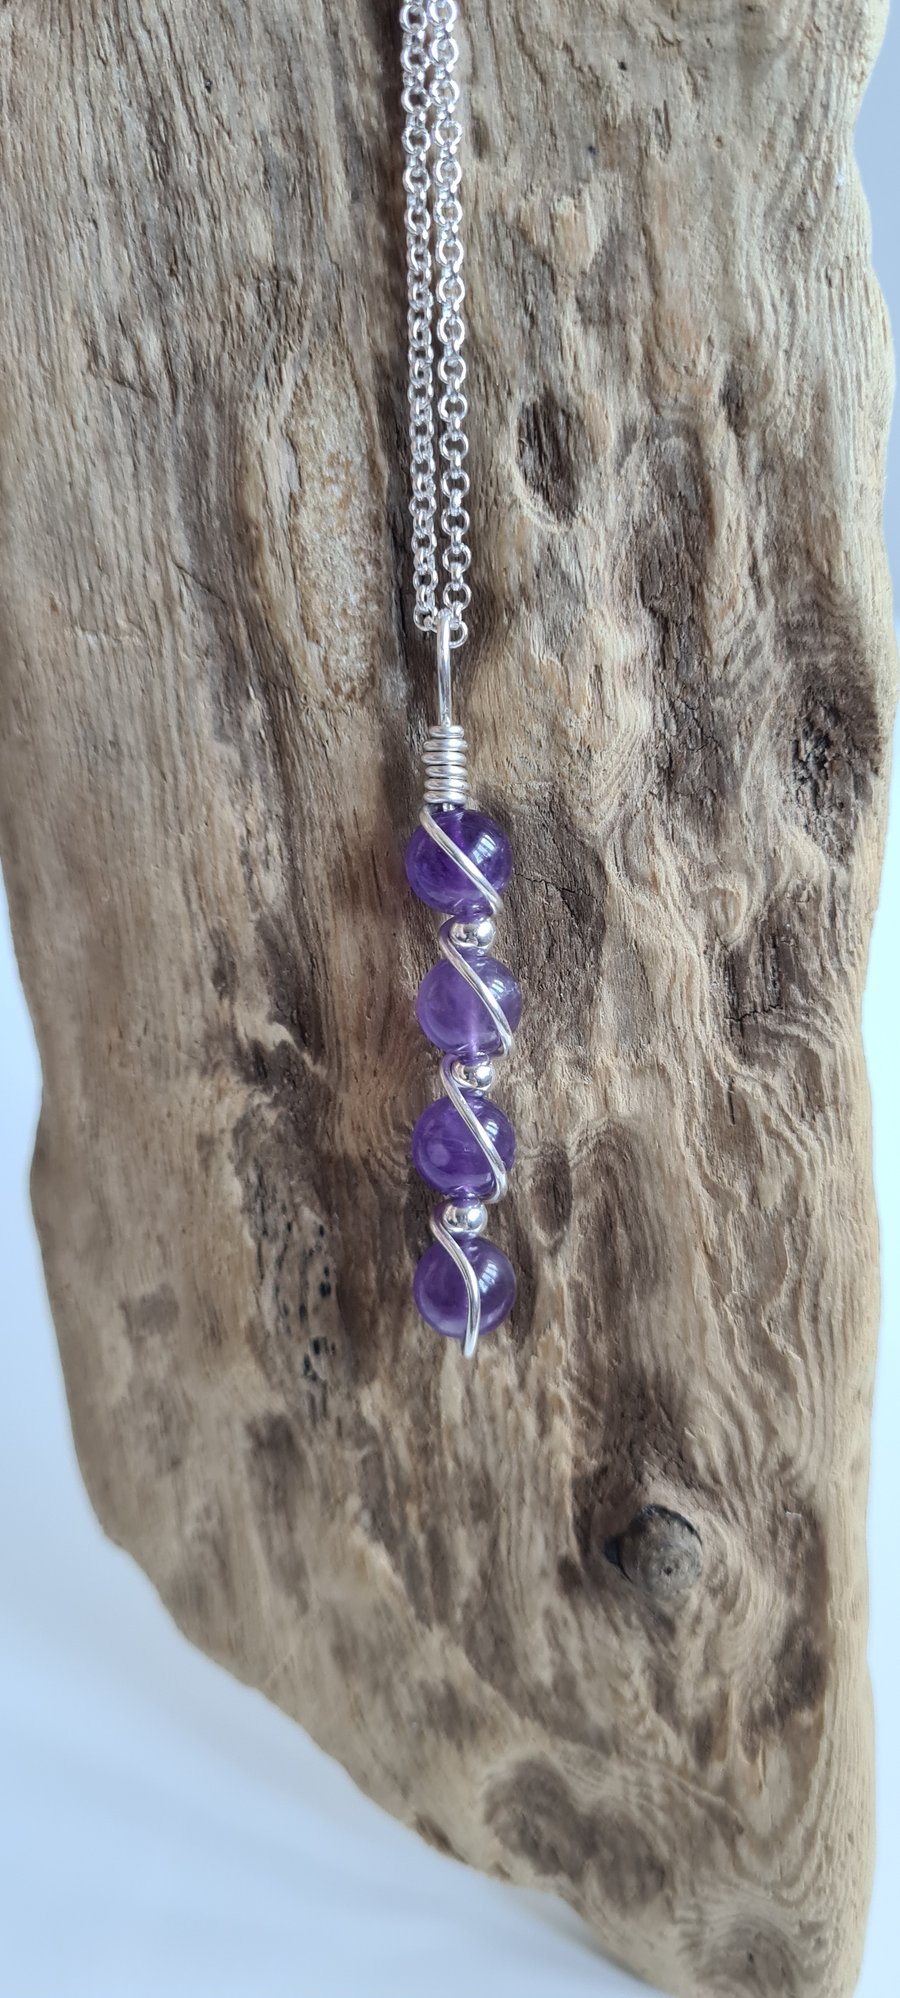 Handmade 925 Silver & Natural Amethyst Necklace Pendant Gift Crystal Jewellery